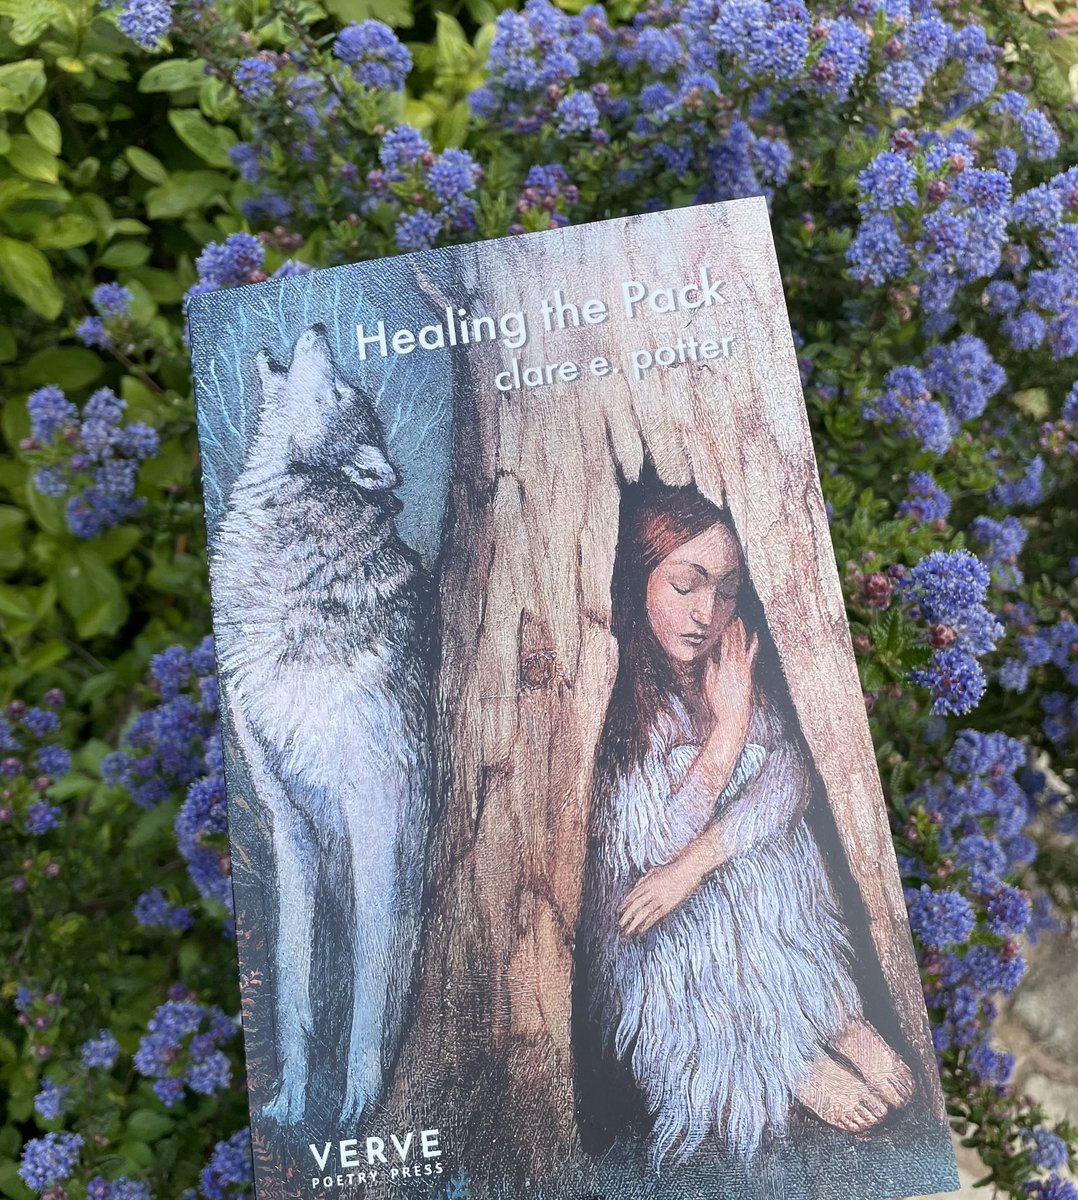 #bookpost @clare_potter new poetry collection, Healing the Pack. What a gorgeous cover ❤️ @VervePoetryPres